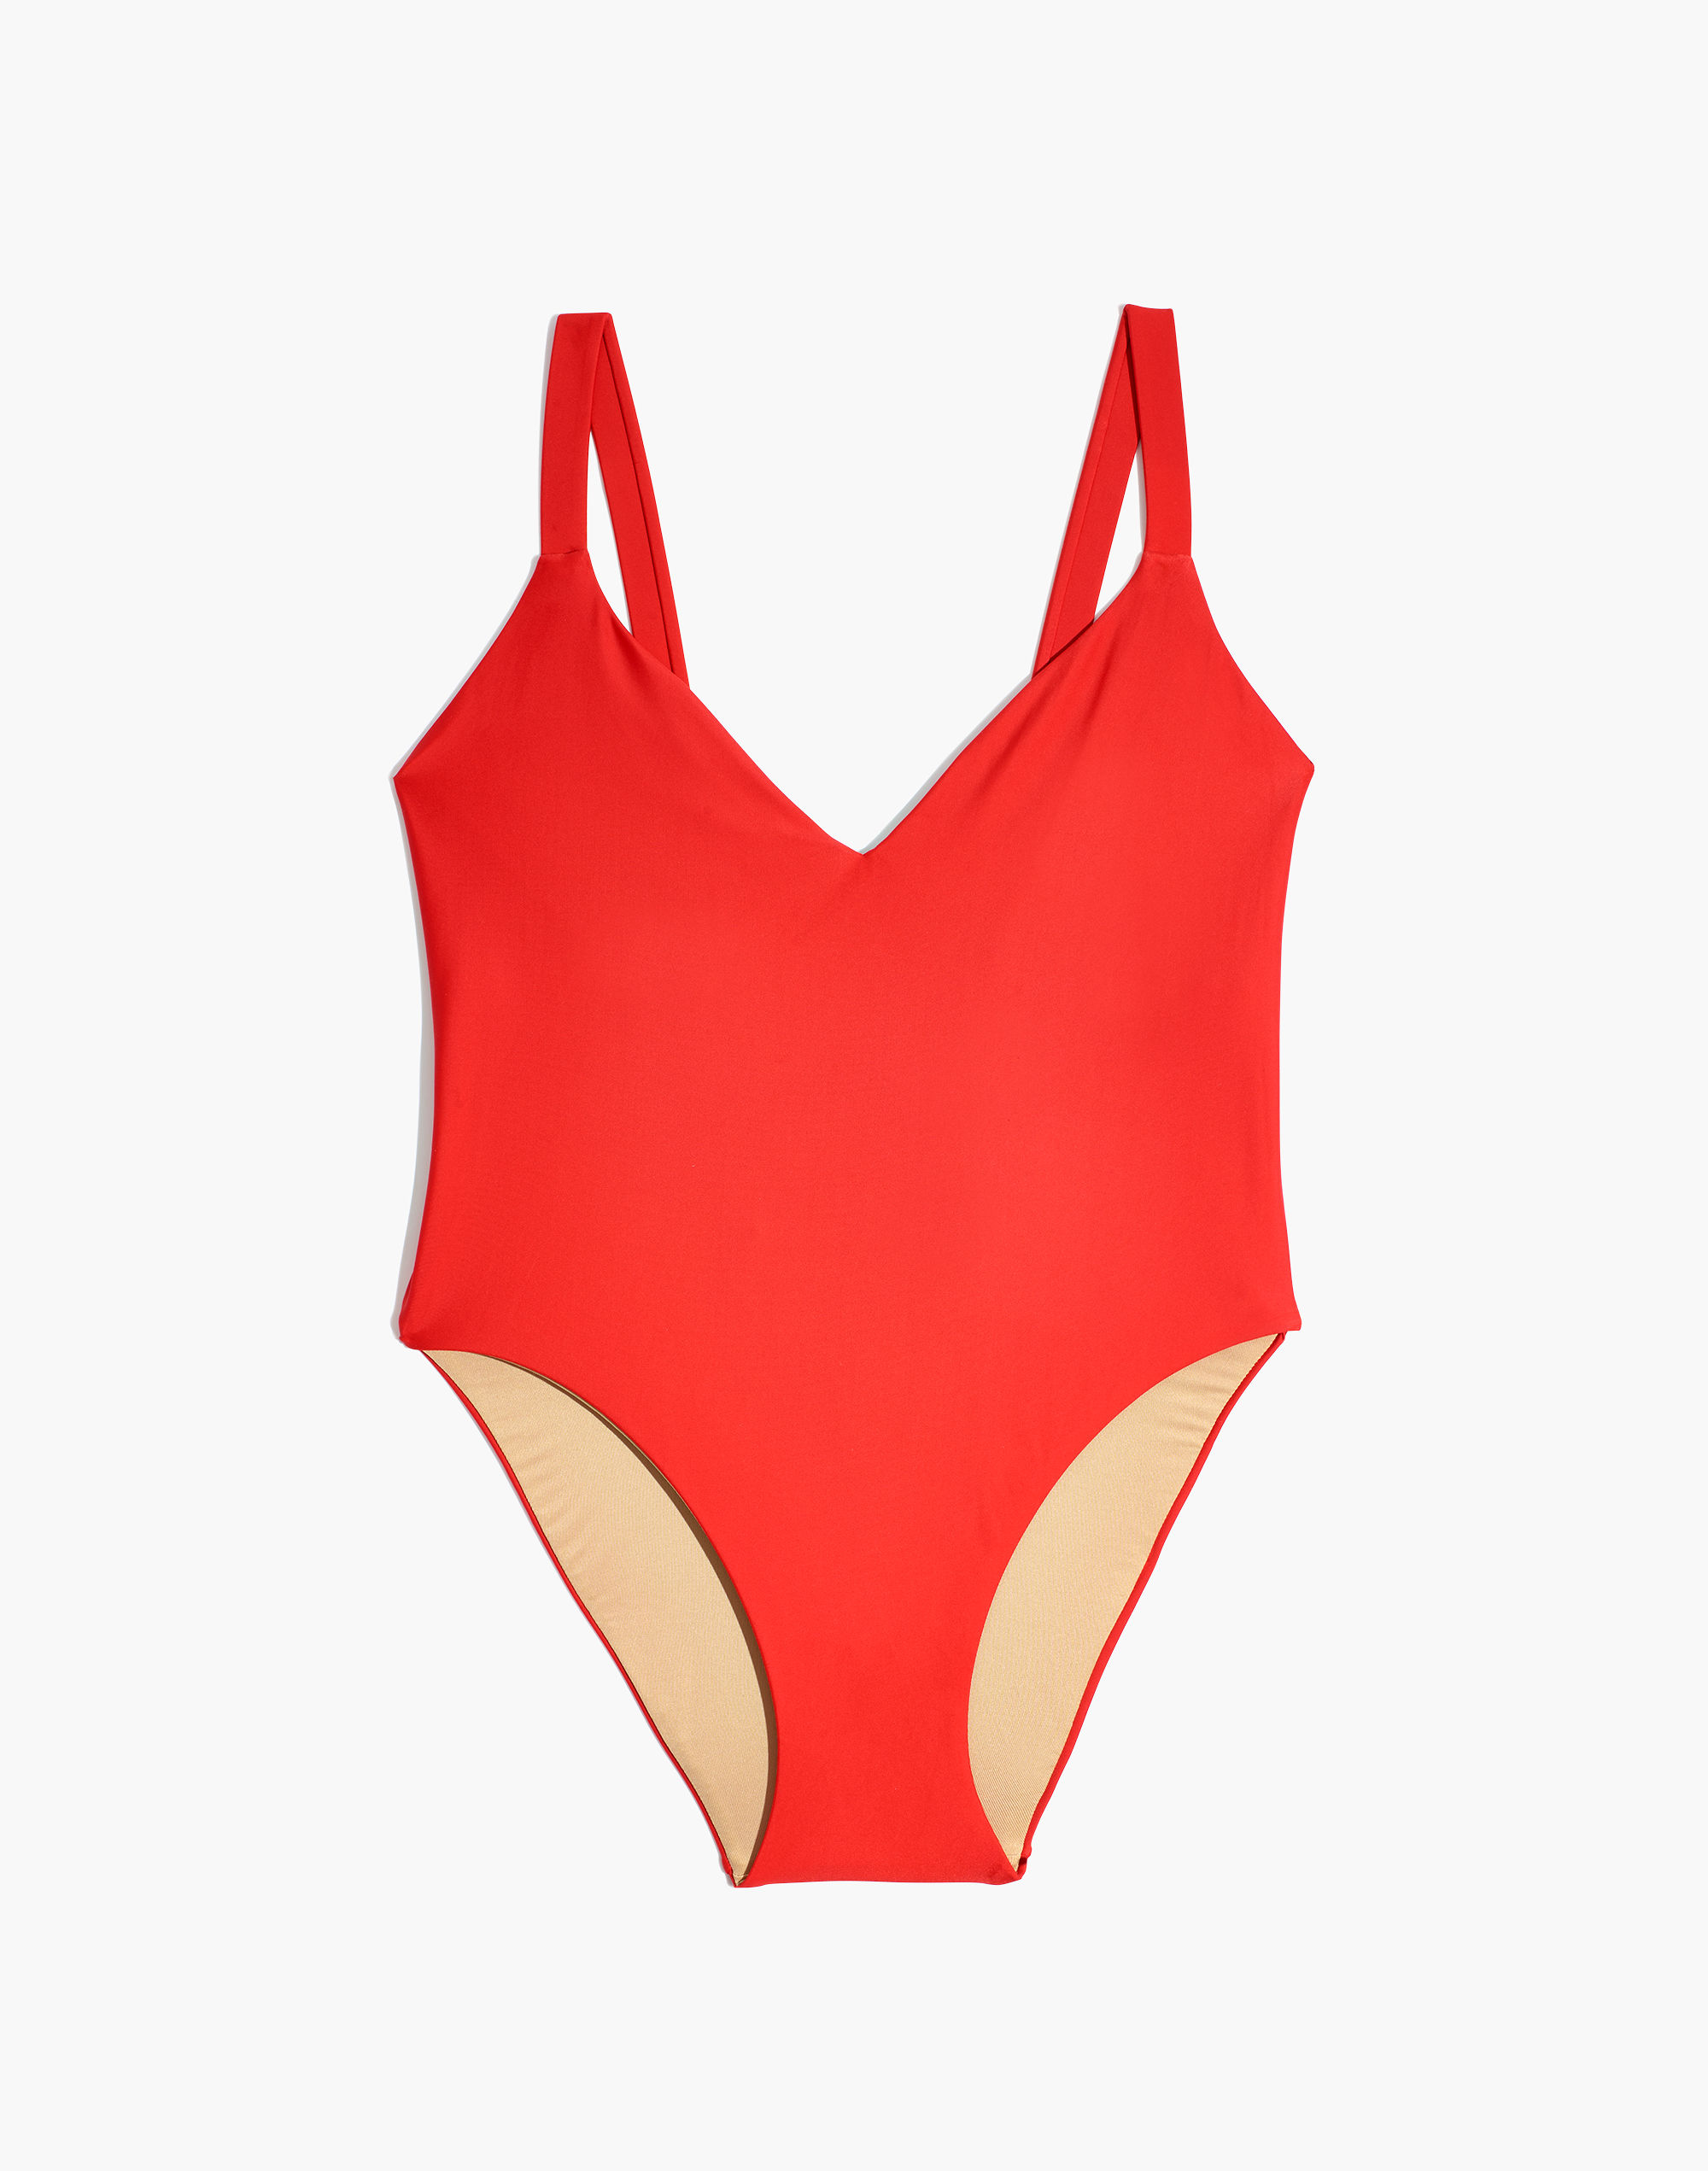 Madewell Second Wave Maillot One-Piece Swimsuit